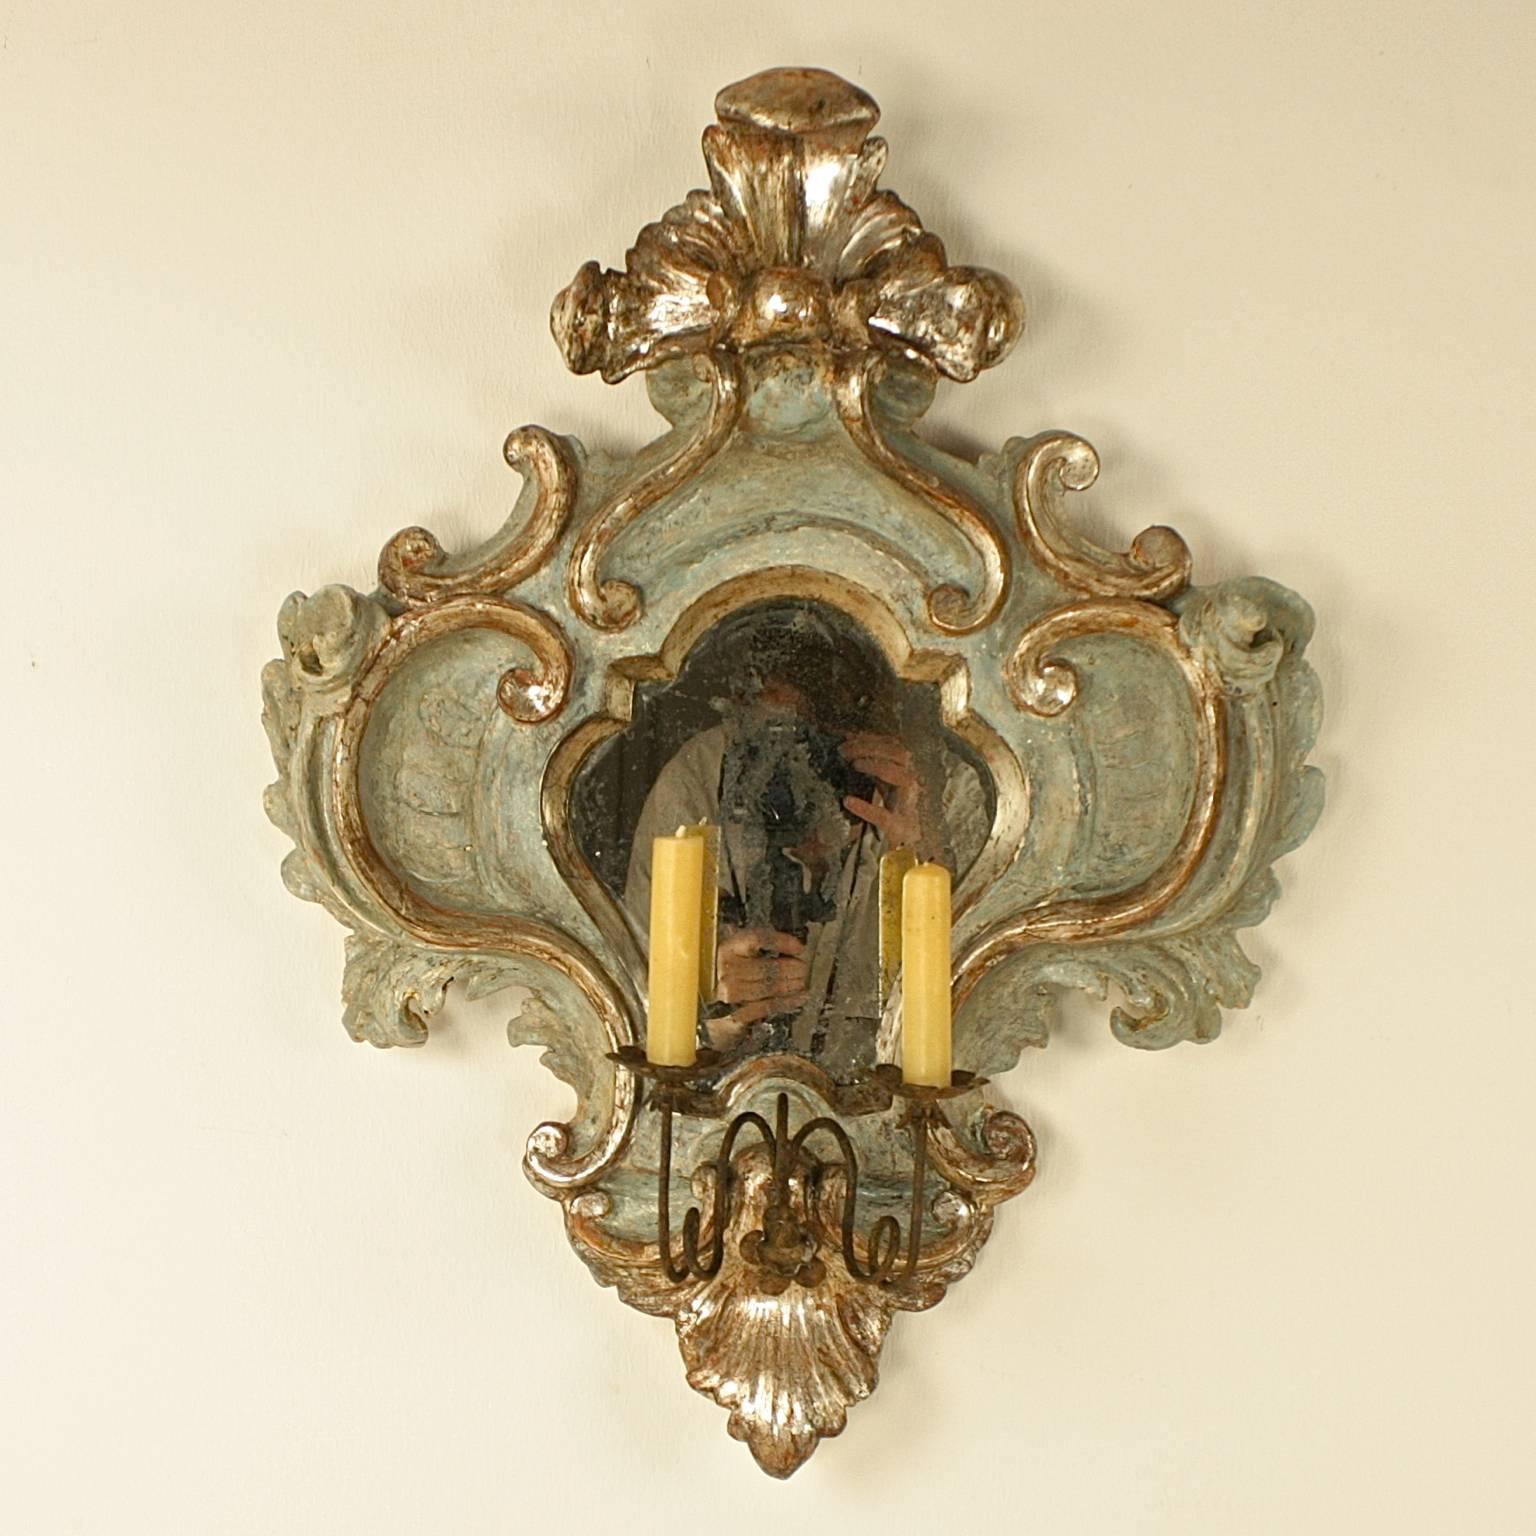 Pair of pale blue painted and silvered girandoles or sconce with two metal candle supports. The broadly symmetrical carving displays silvered scrolls and acanthus leaves contrasting with the blue surface decoration. The mirror glass and the silvered